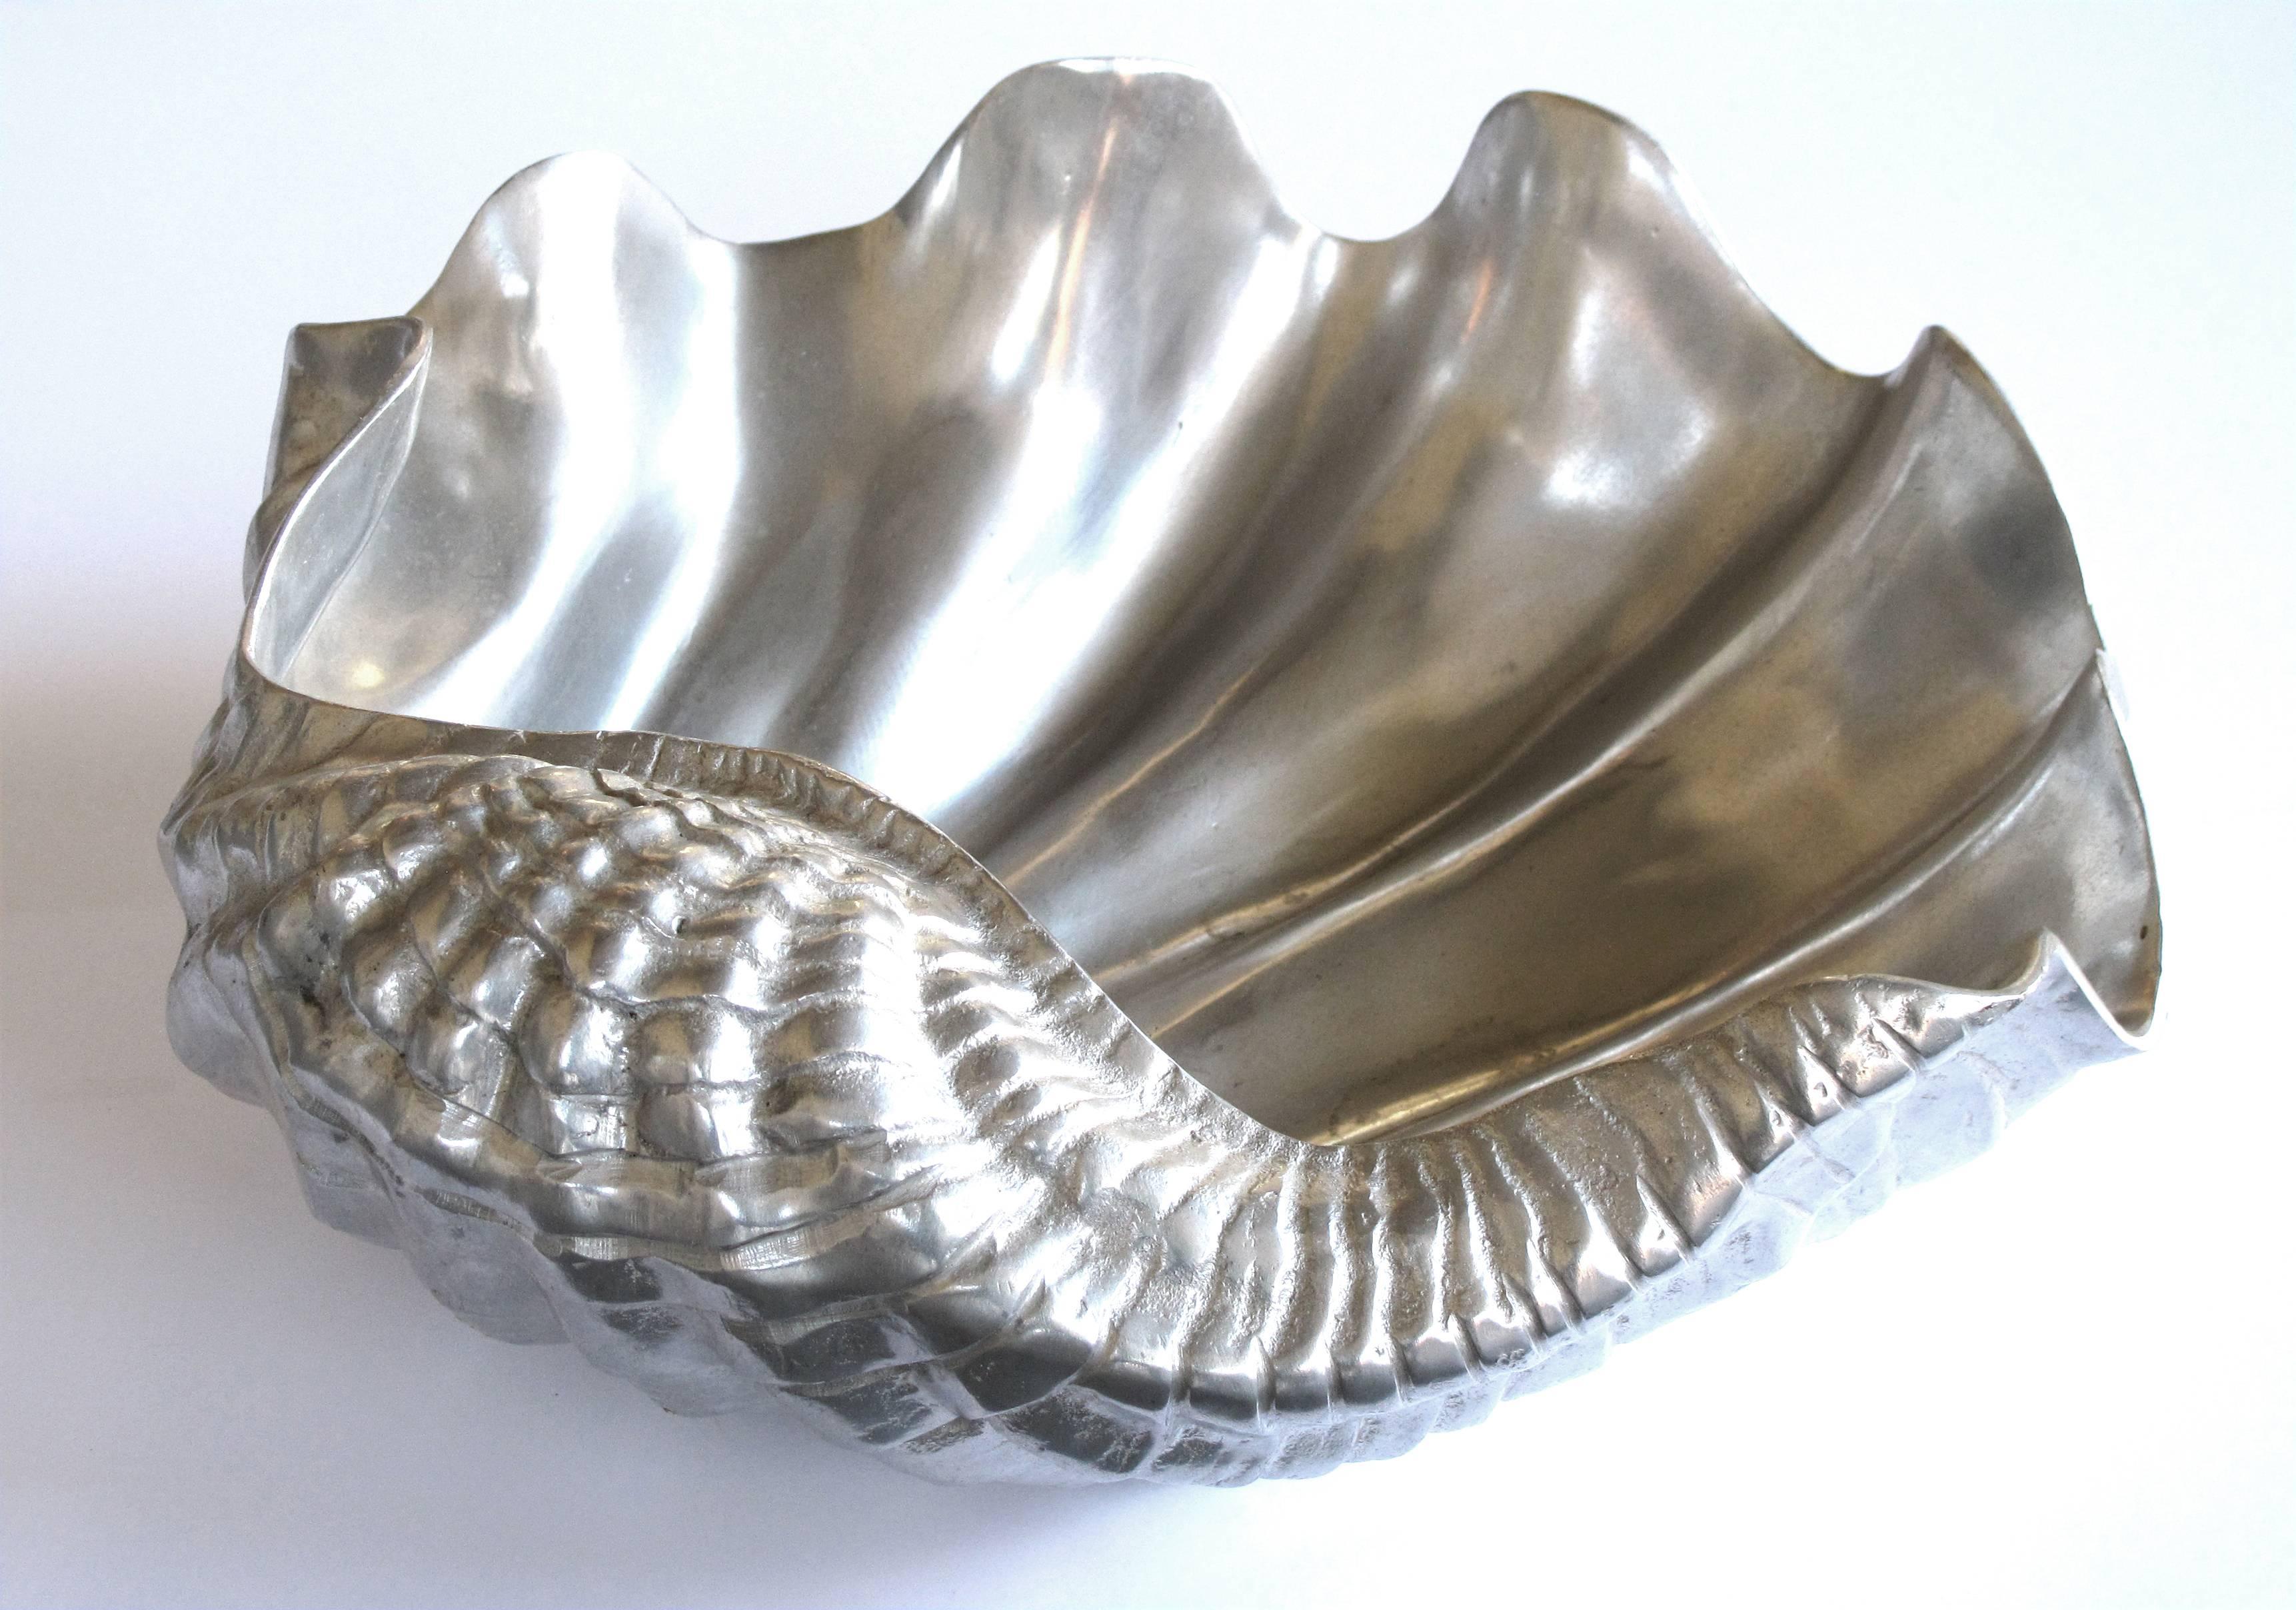 Late 20th Century Finely Detailed American Aluminium Clam Shell by Arthur Court, San Francisco